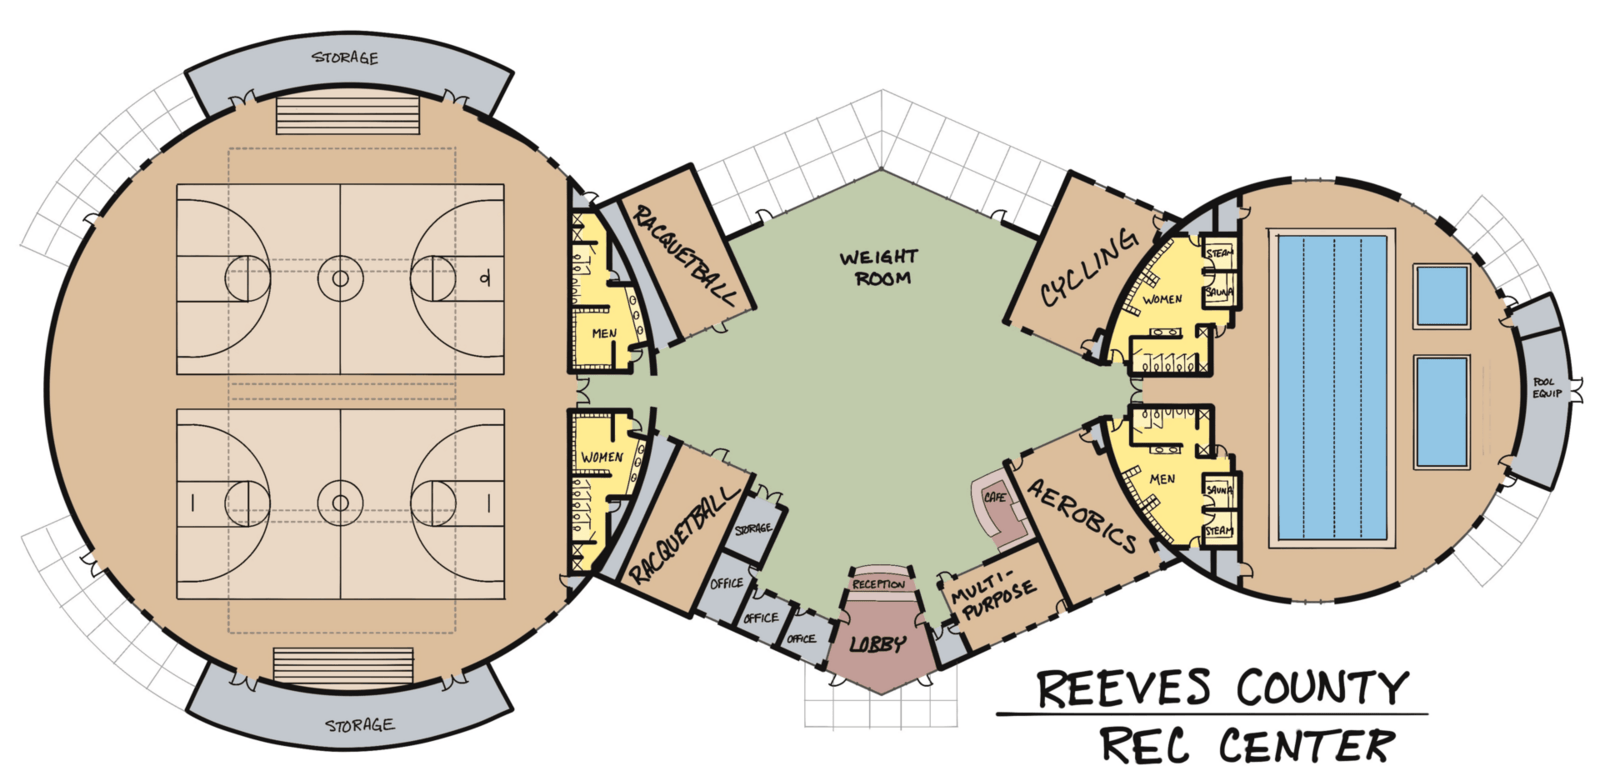 Illustrated floor plan of the recreation center.